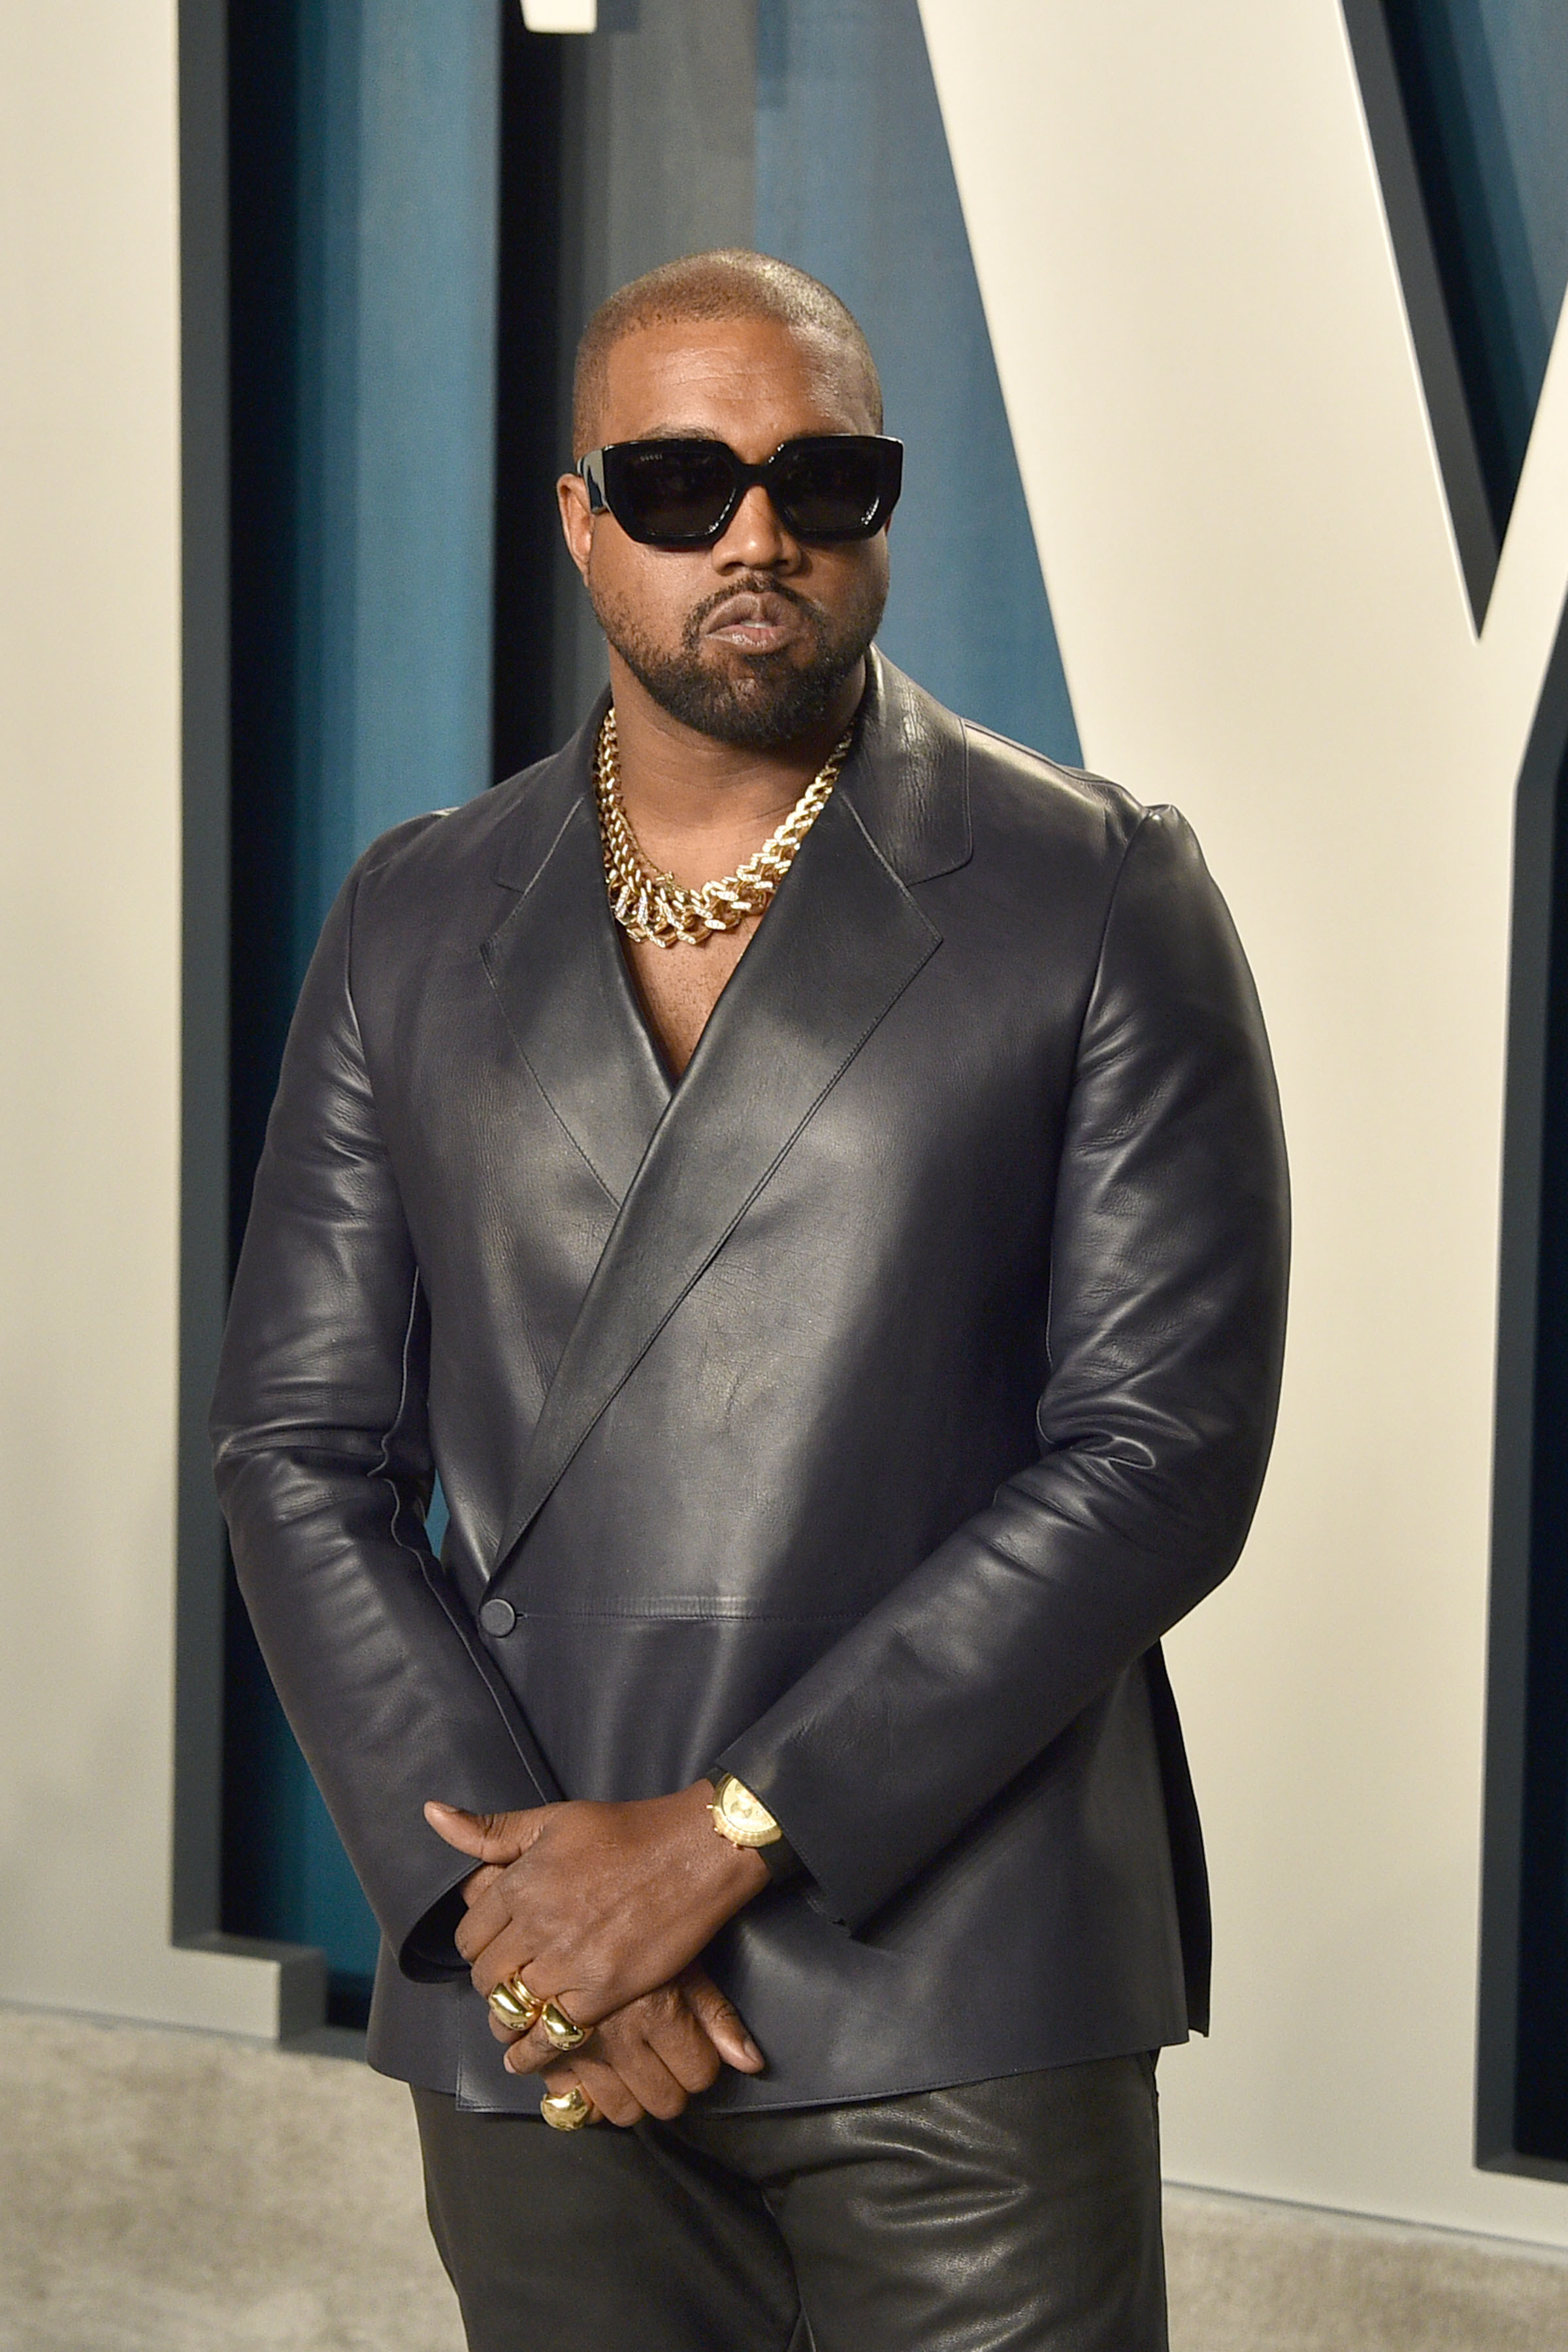 West poses at the red carpet with his hands crossed while wearing a leather suit